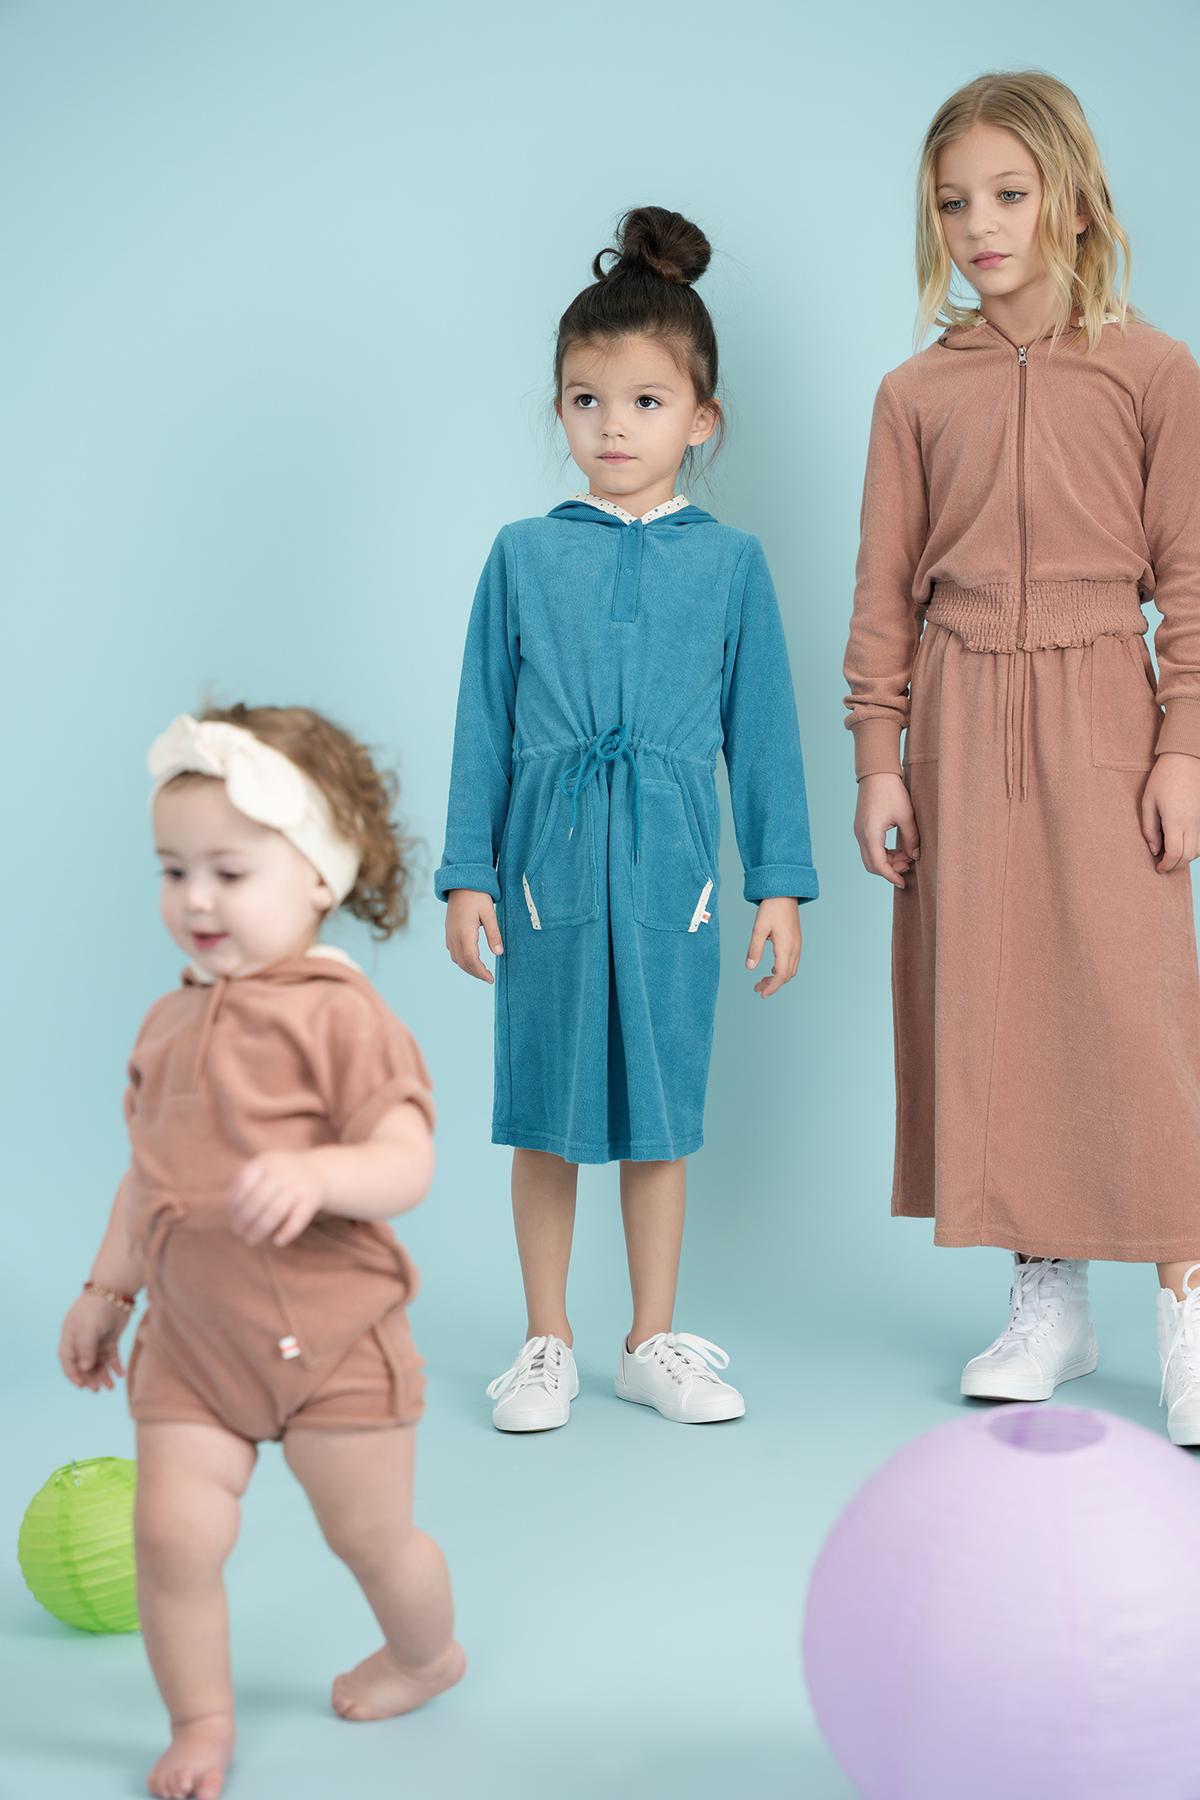 Amazon.in: Mother Daughter Matching Dress